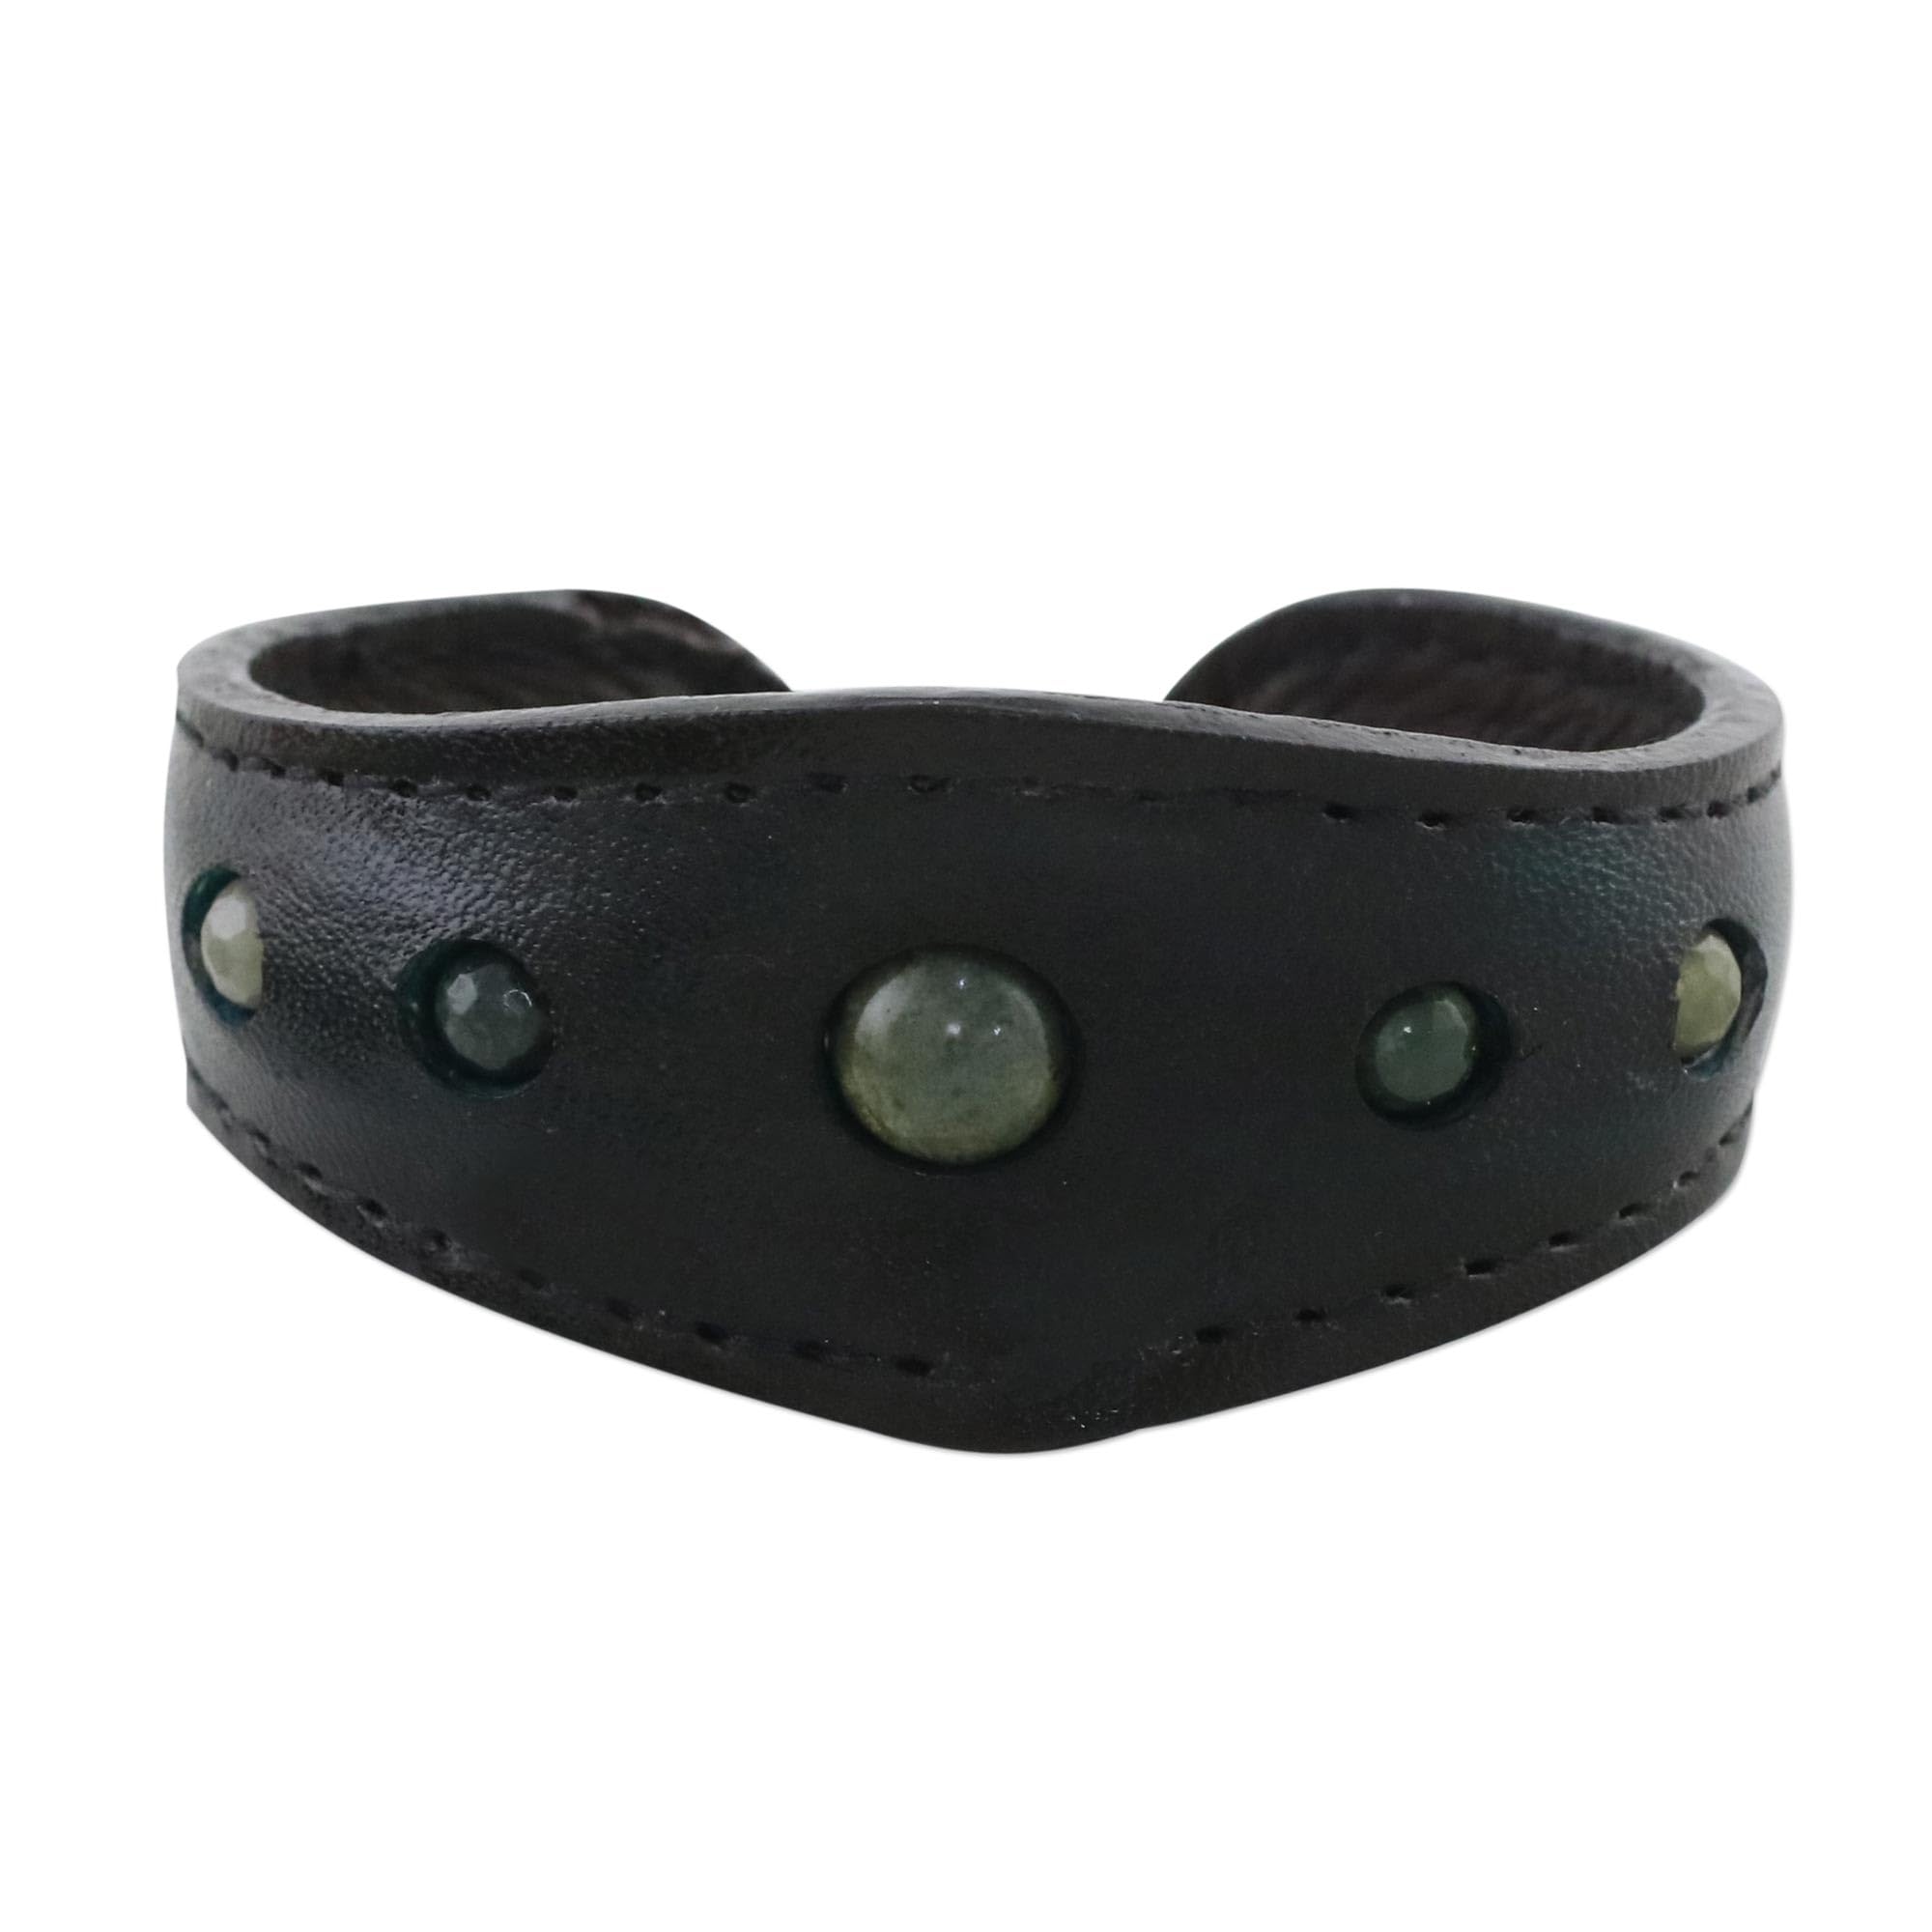 NOVICA Handmade Agate Cuff Bracelet Green Leather Black Thailand Birthstone [7 in L (end to End) x 1.2 in W] 'Green Moss Power'